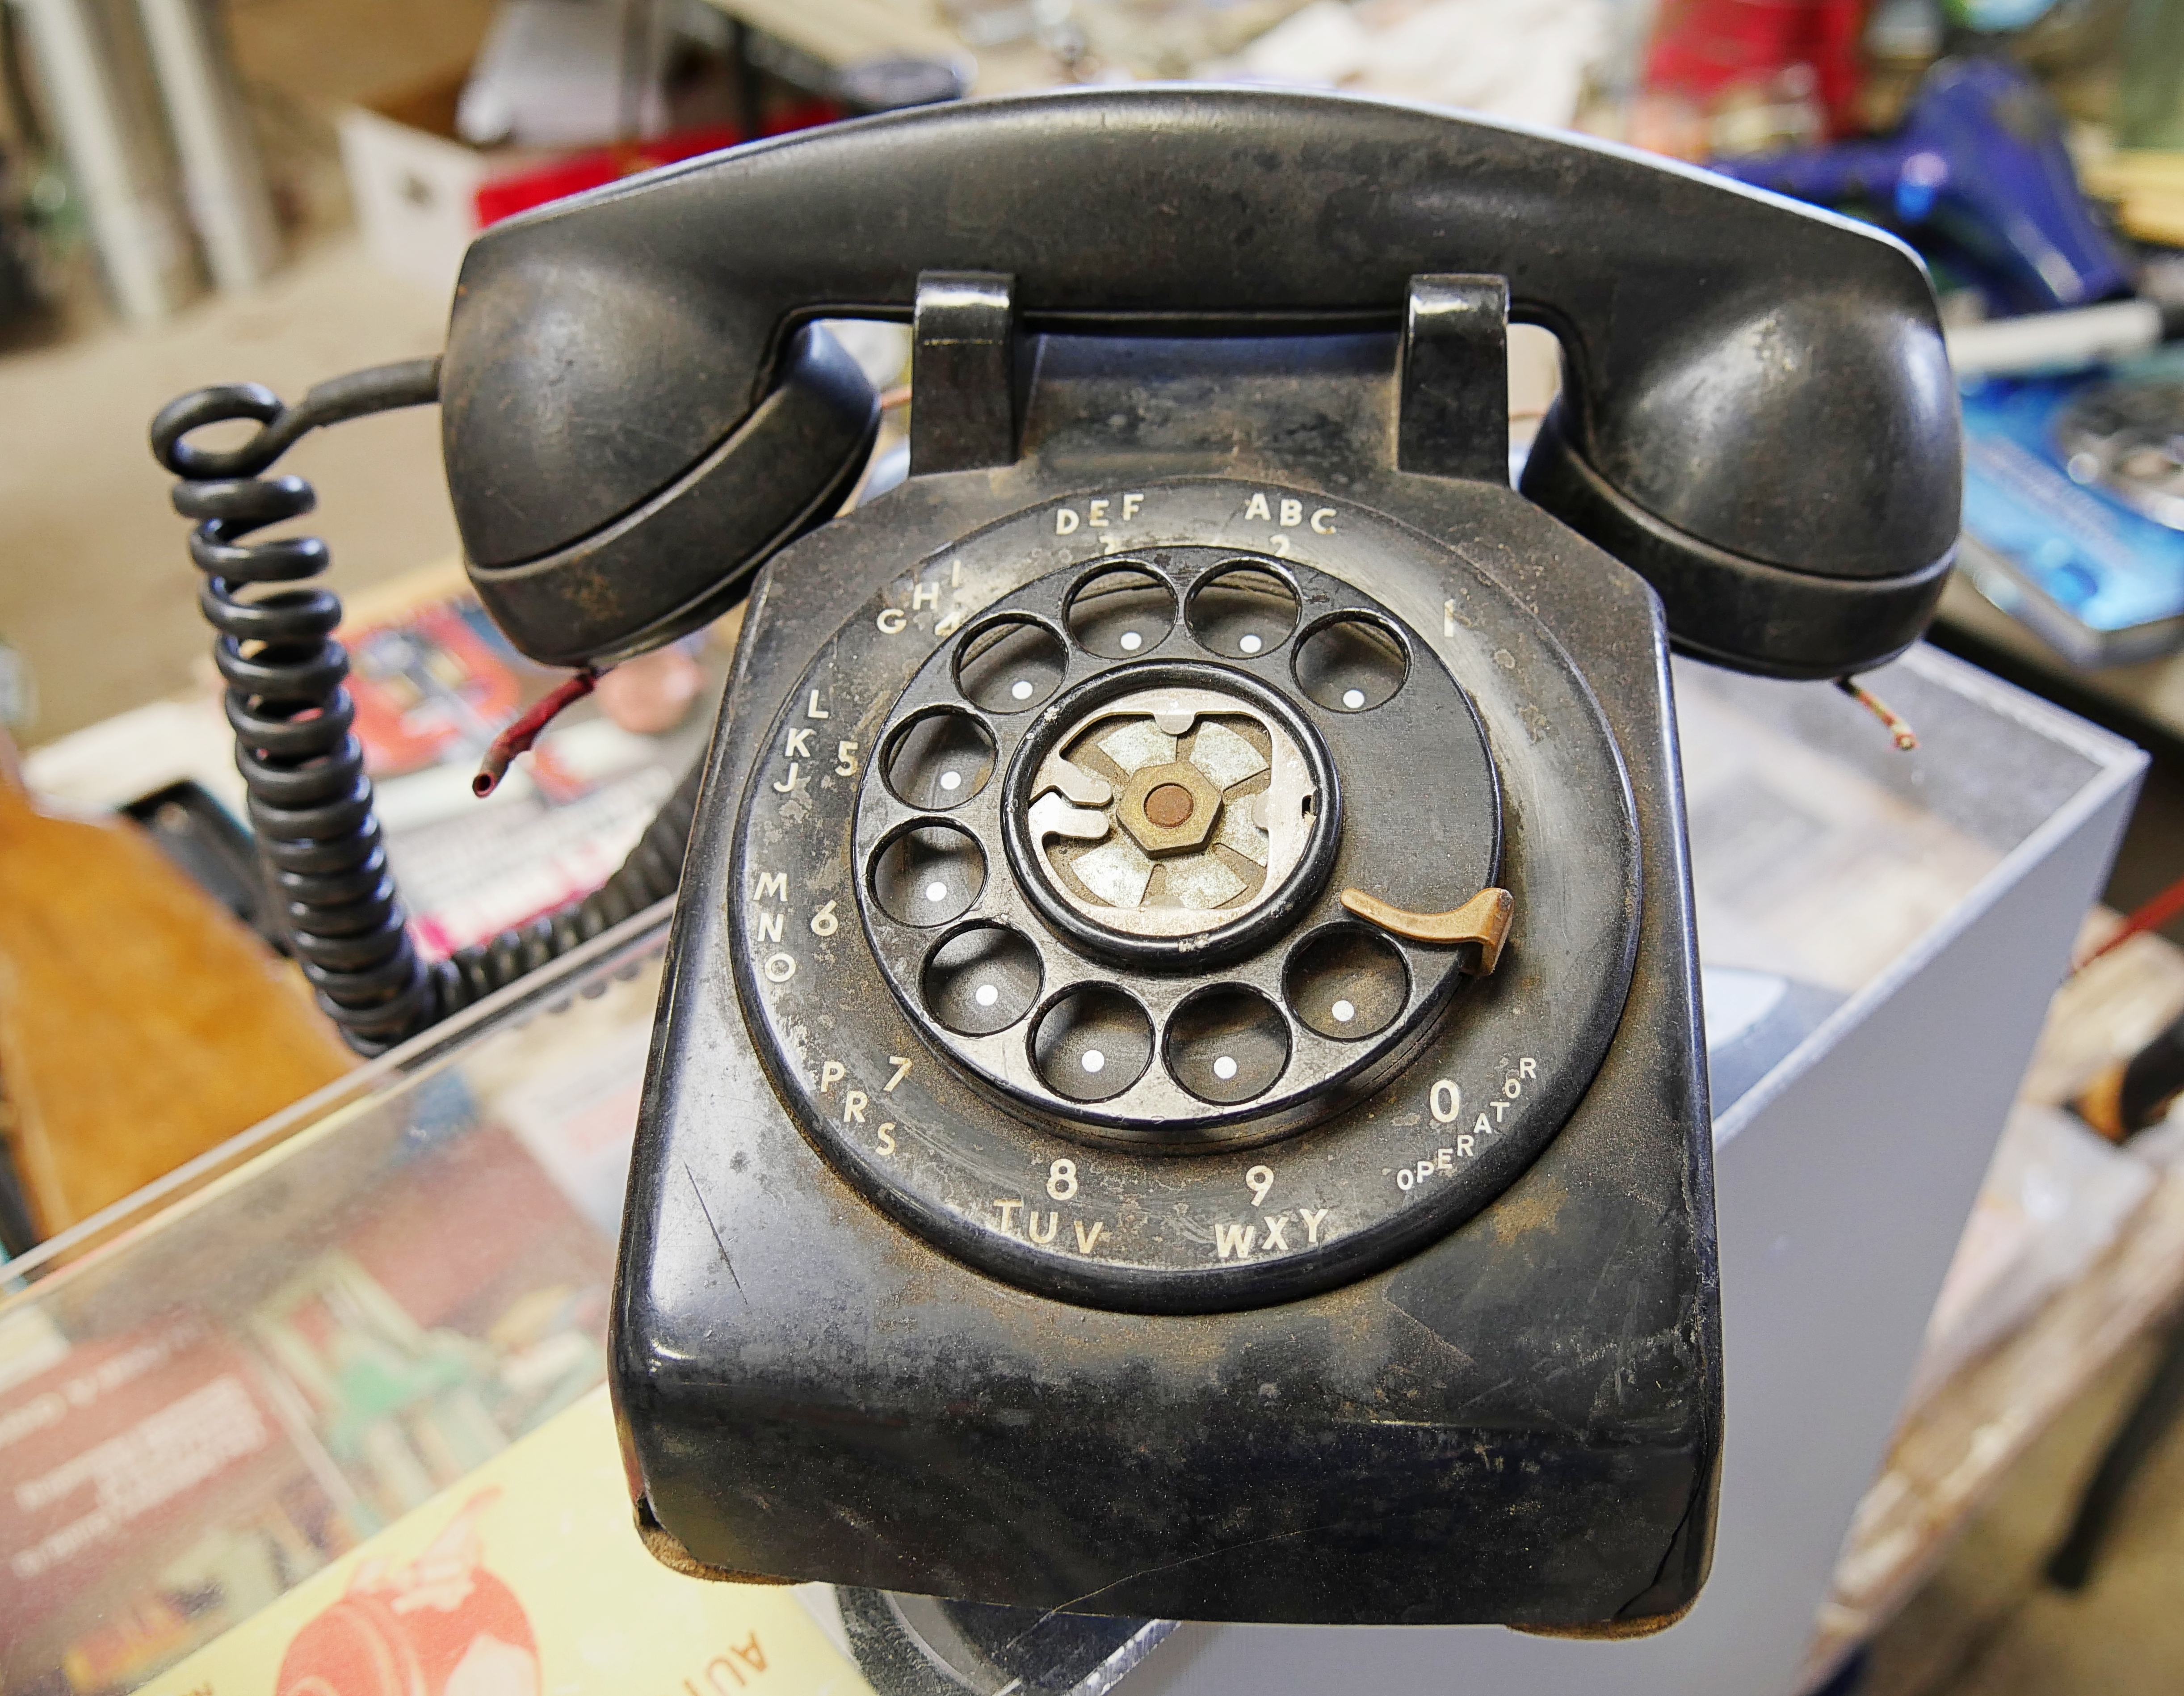 Rotary Phones And The Birth Of A Network